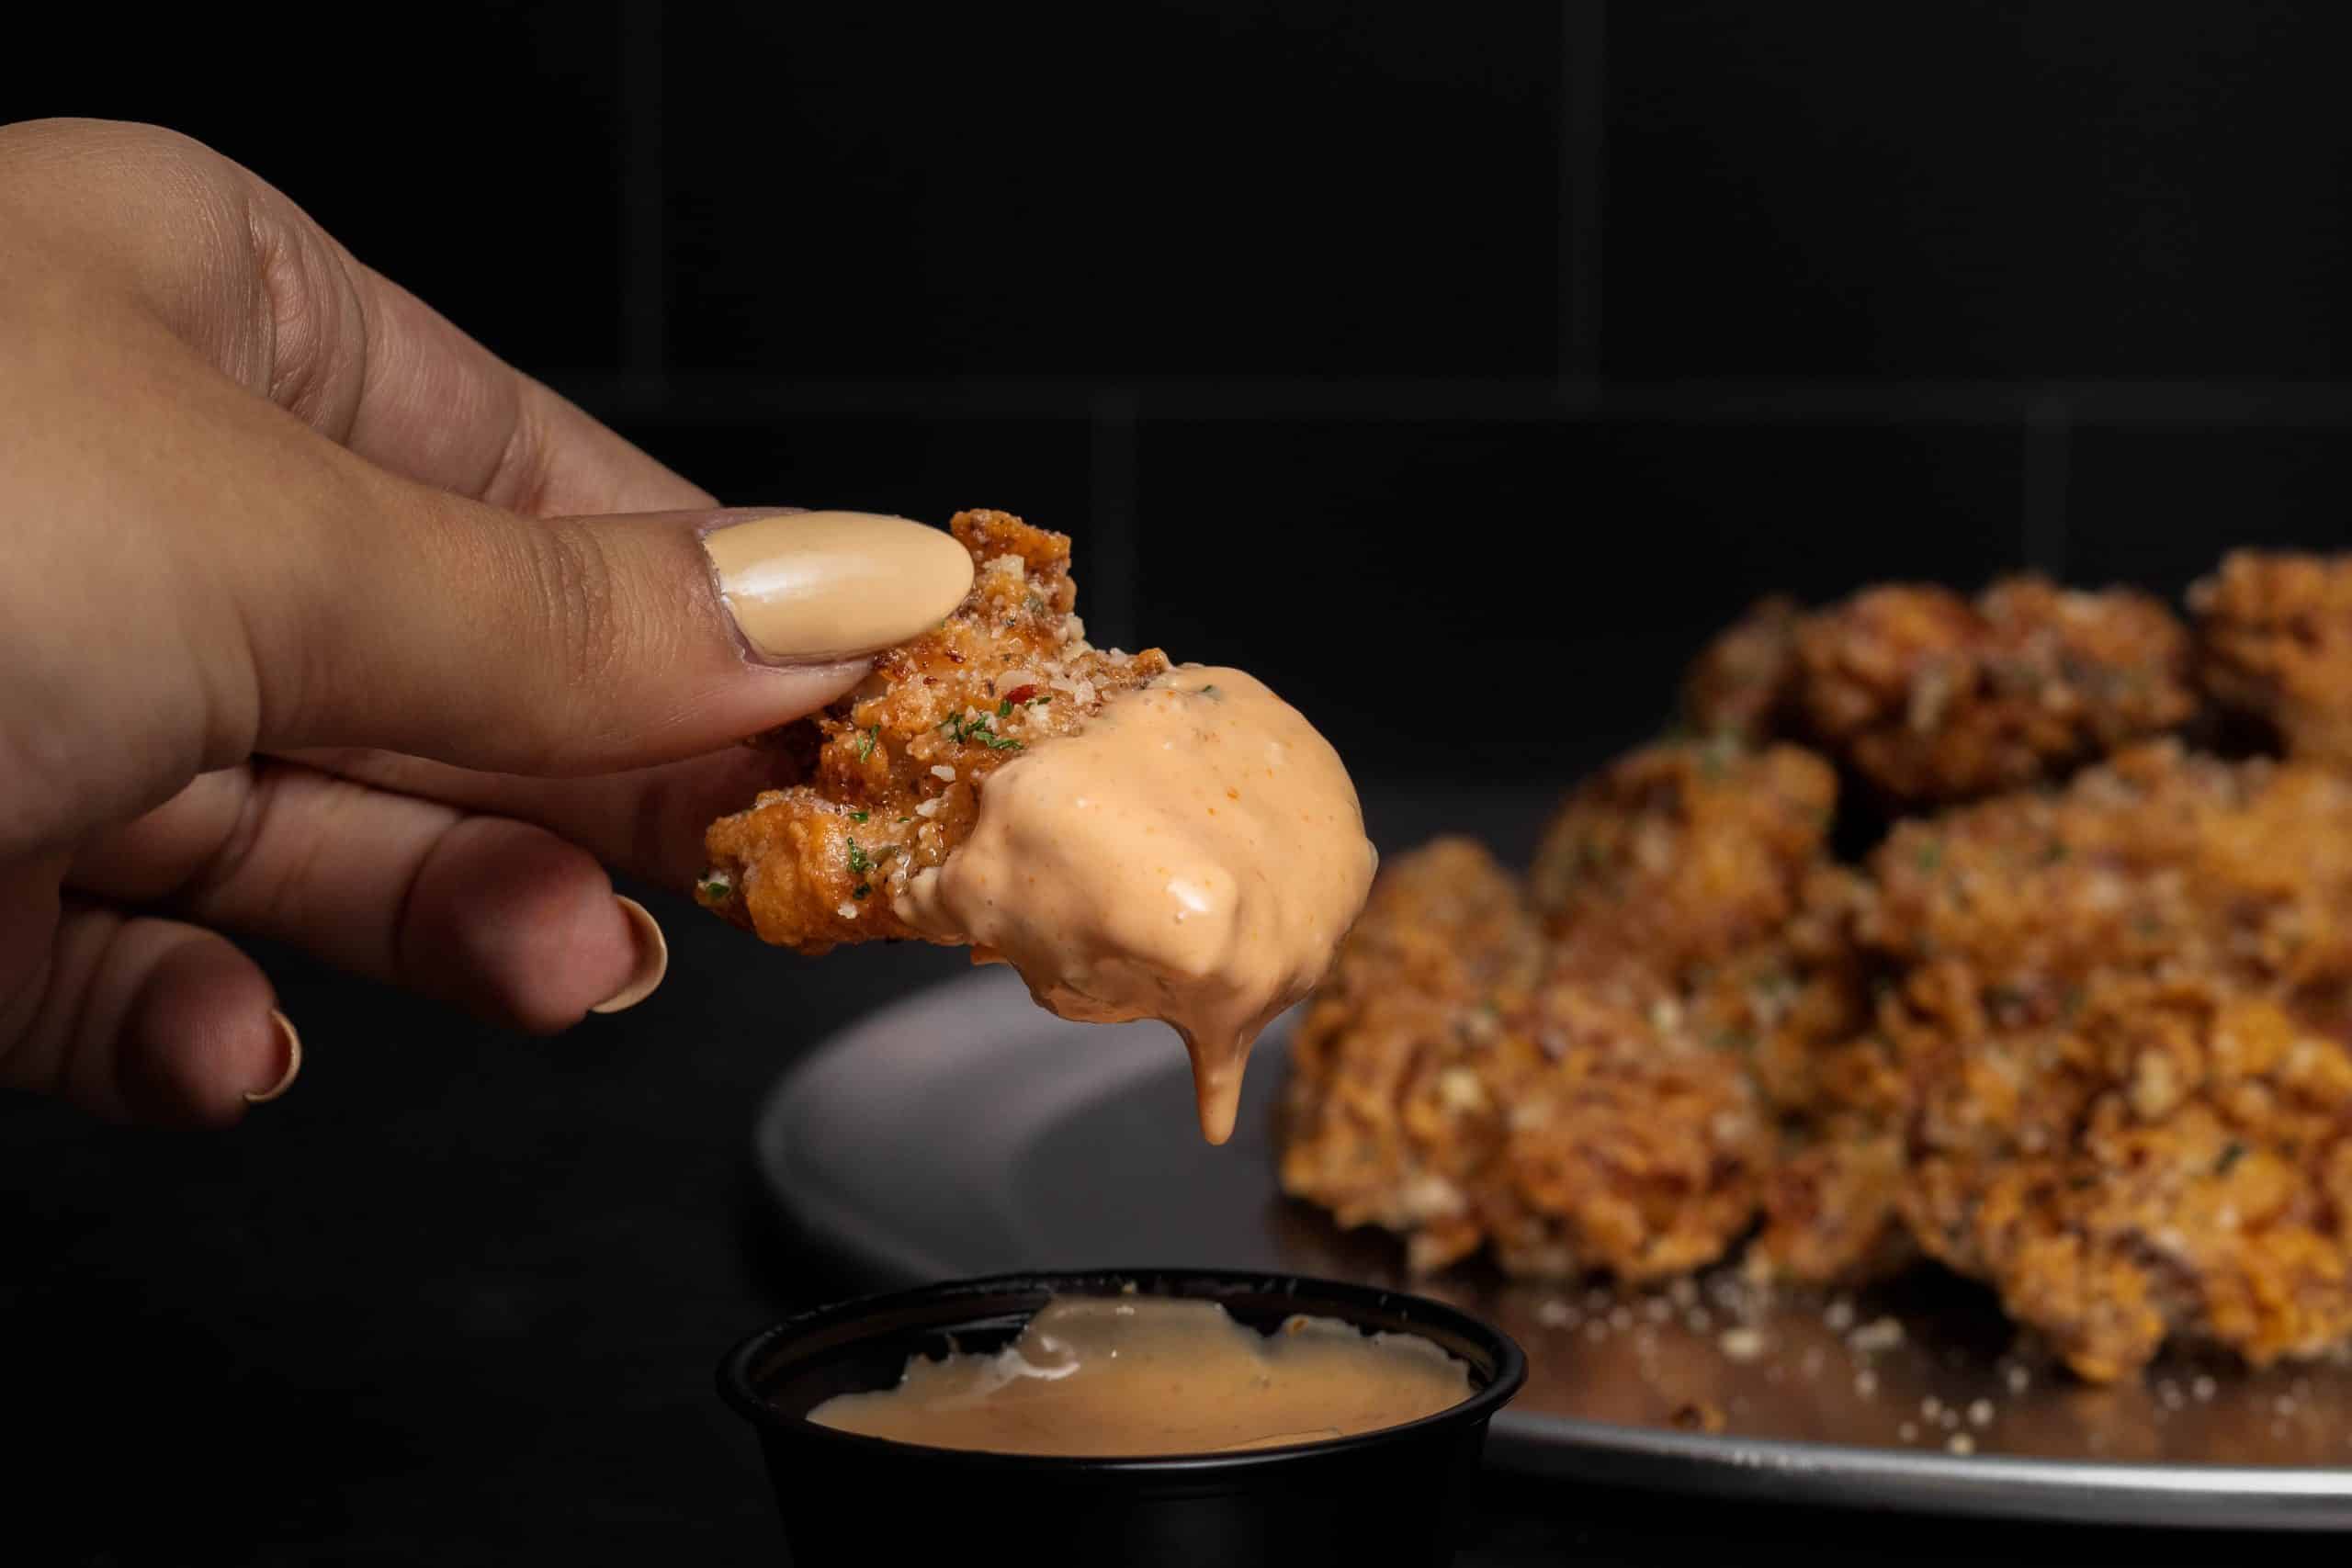 Fried chicken thigh nuggets, garlic butter and your choice of dipping sauce.